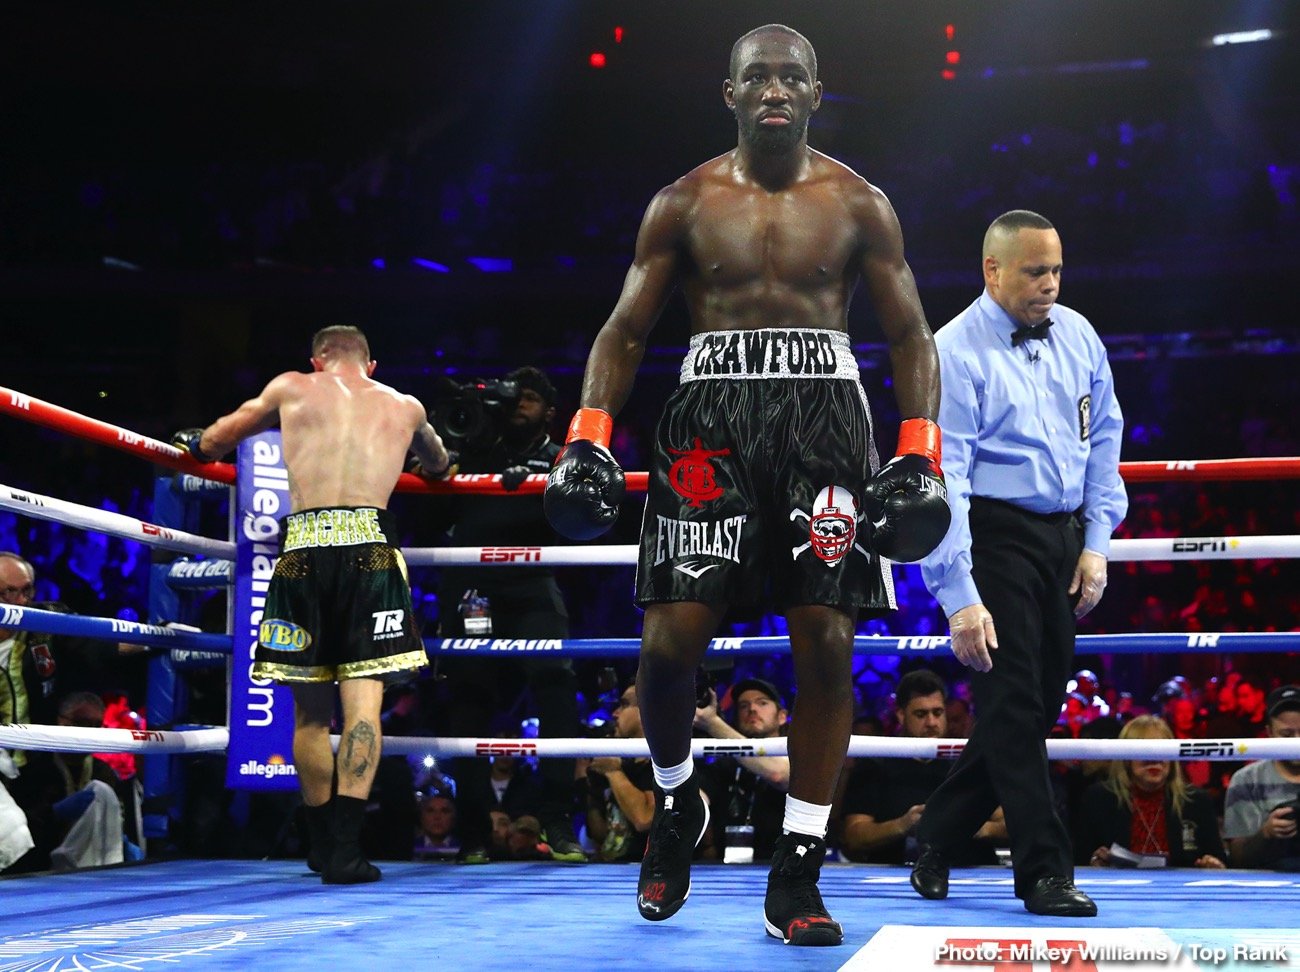 Image: Patrick Teixeira wants to give Terence Crawford a title shot